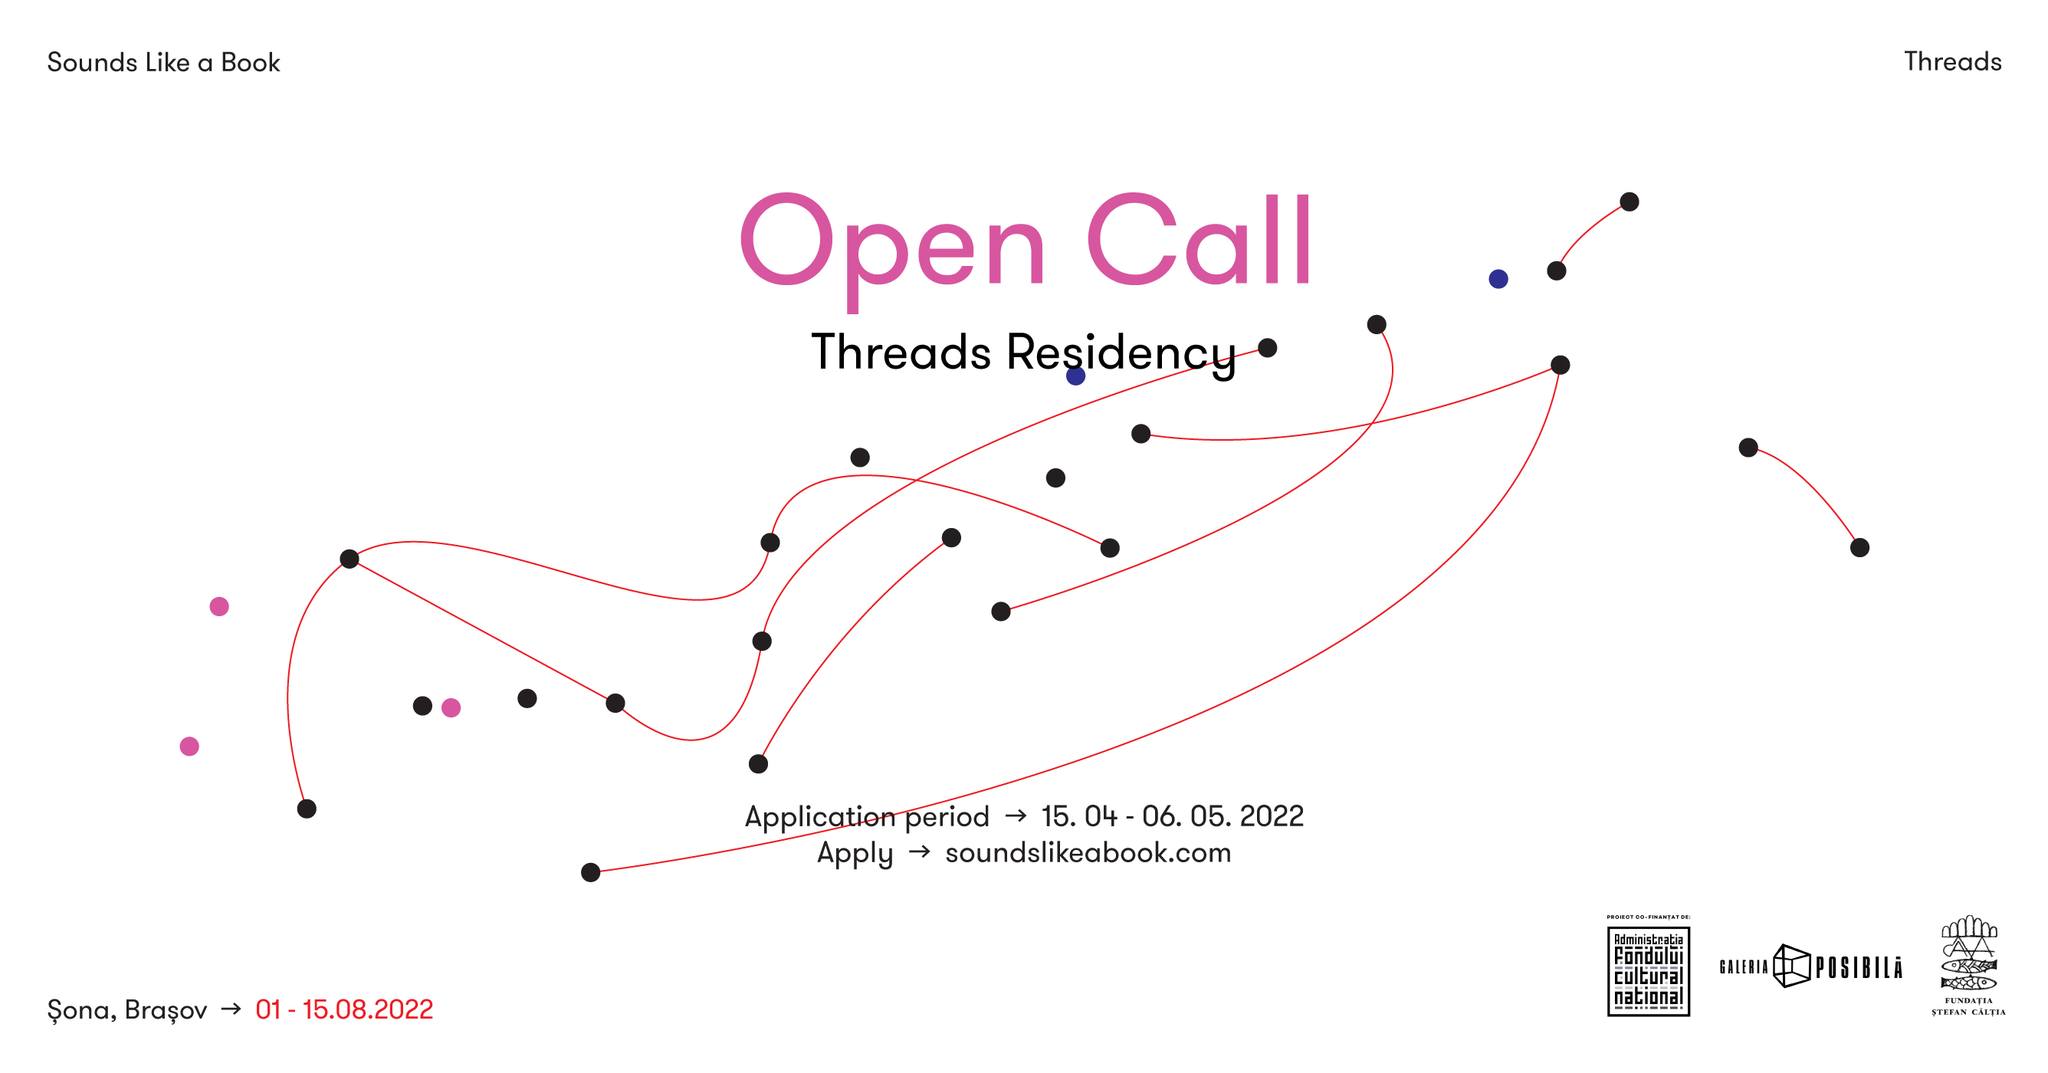 Threads Residency: OPEN CALL